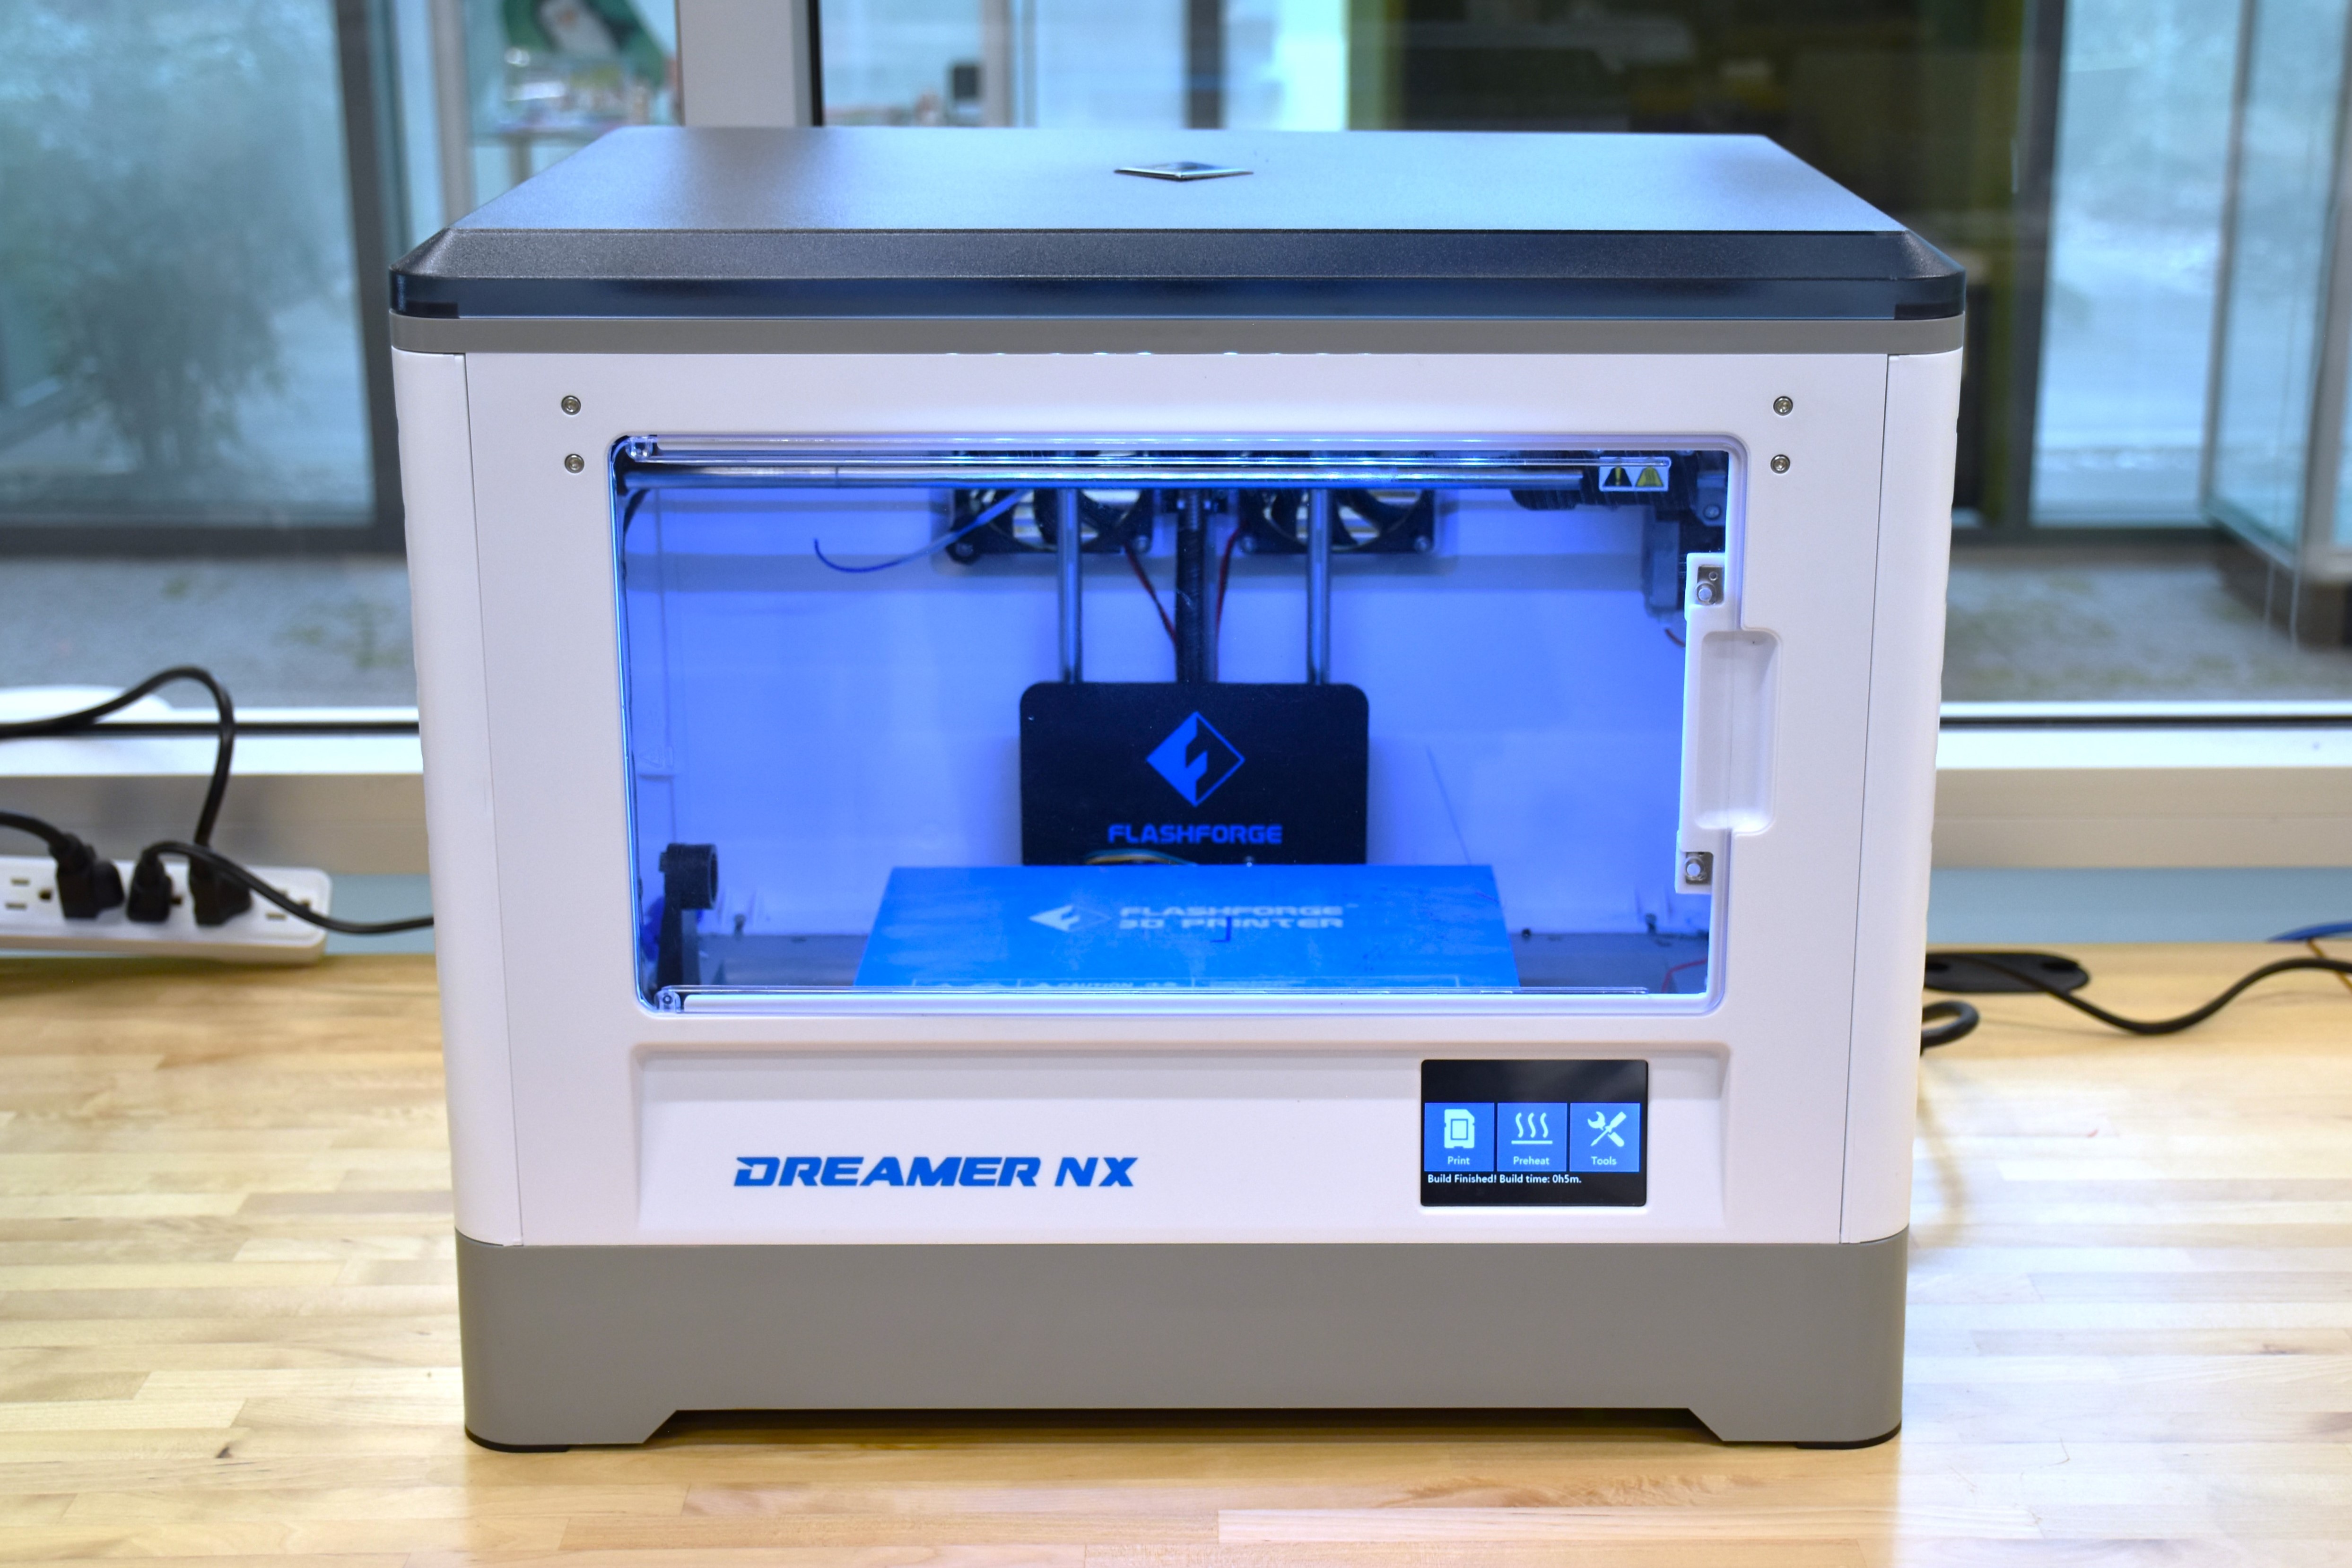 Image shows a Flashforge printer on a table.